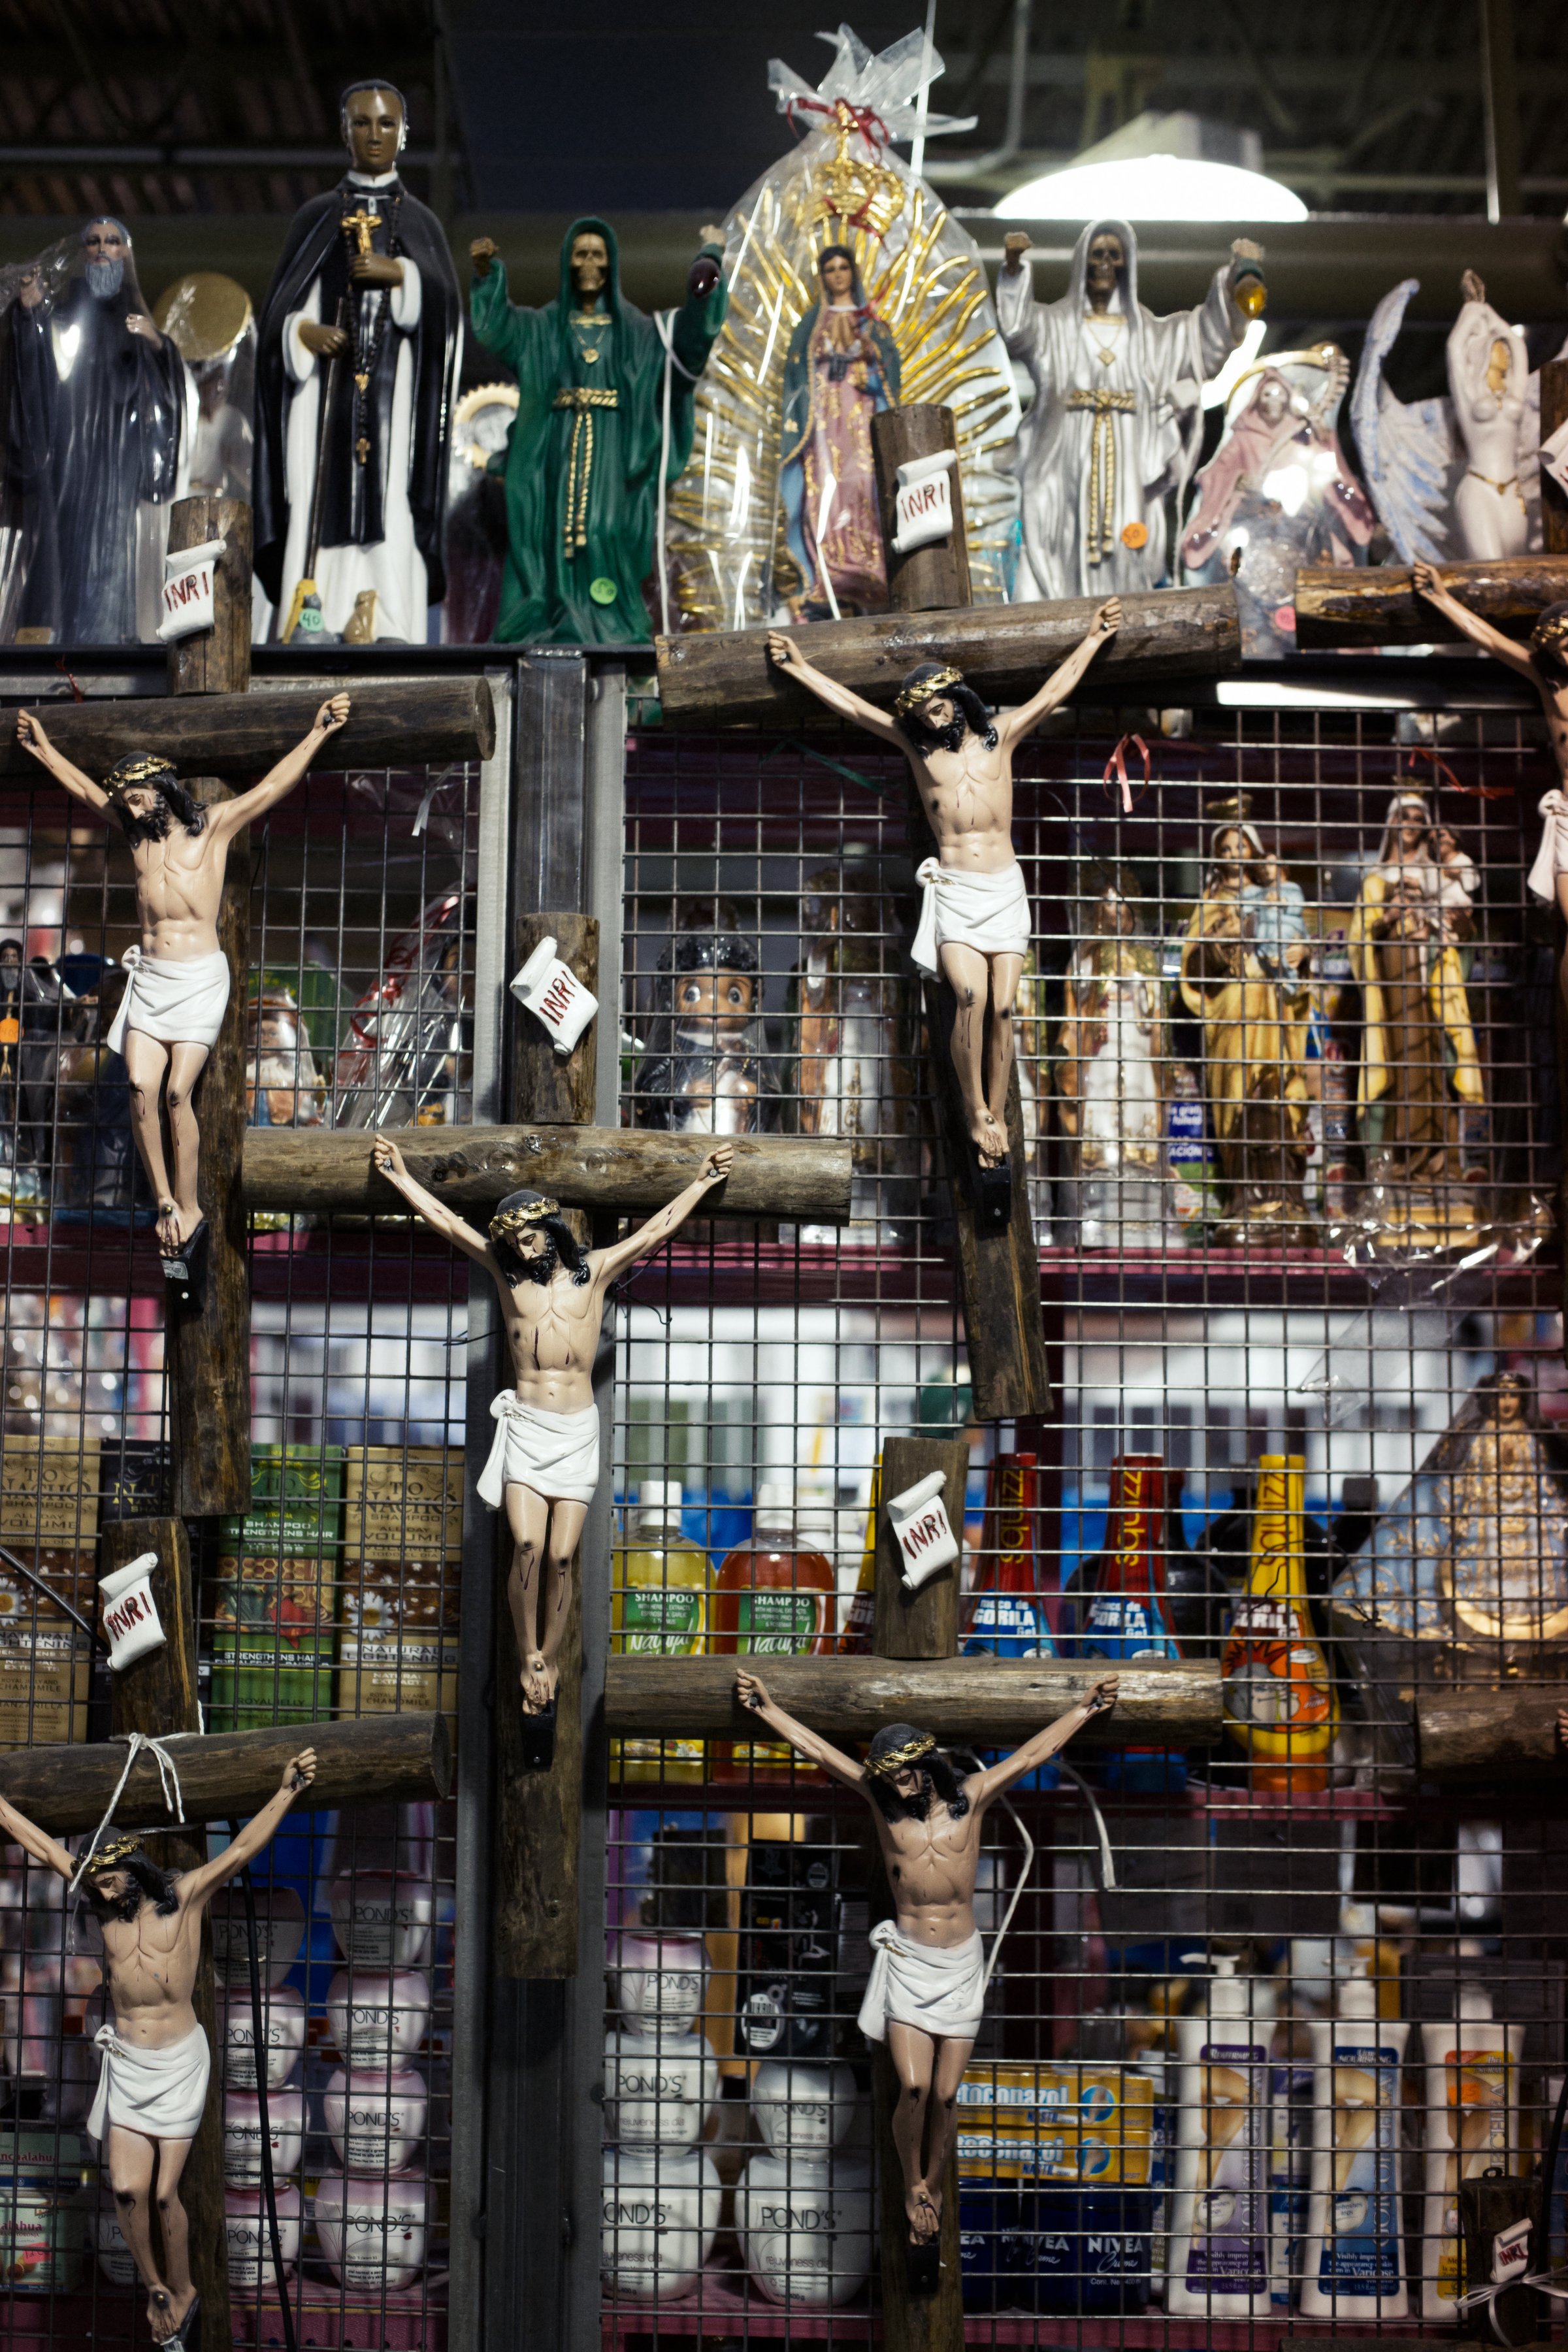 A stall selling Mexican religious icons, Jesus, the Virgin de Guadalupe and the Santa Muerte. Stalls like this are popular in Mexican markets, largely catering to those who feel in need of spiritual cleansing.